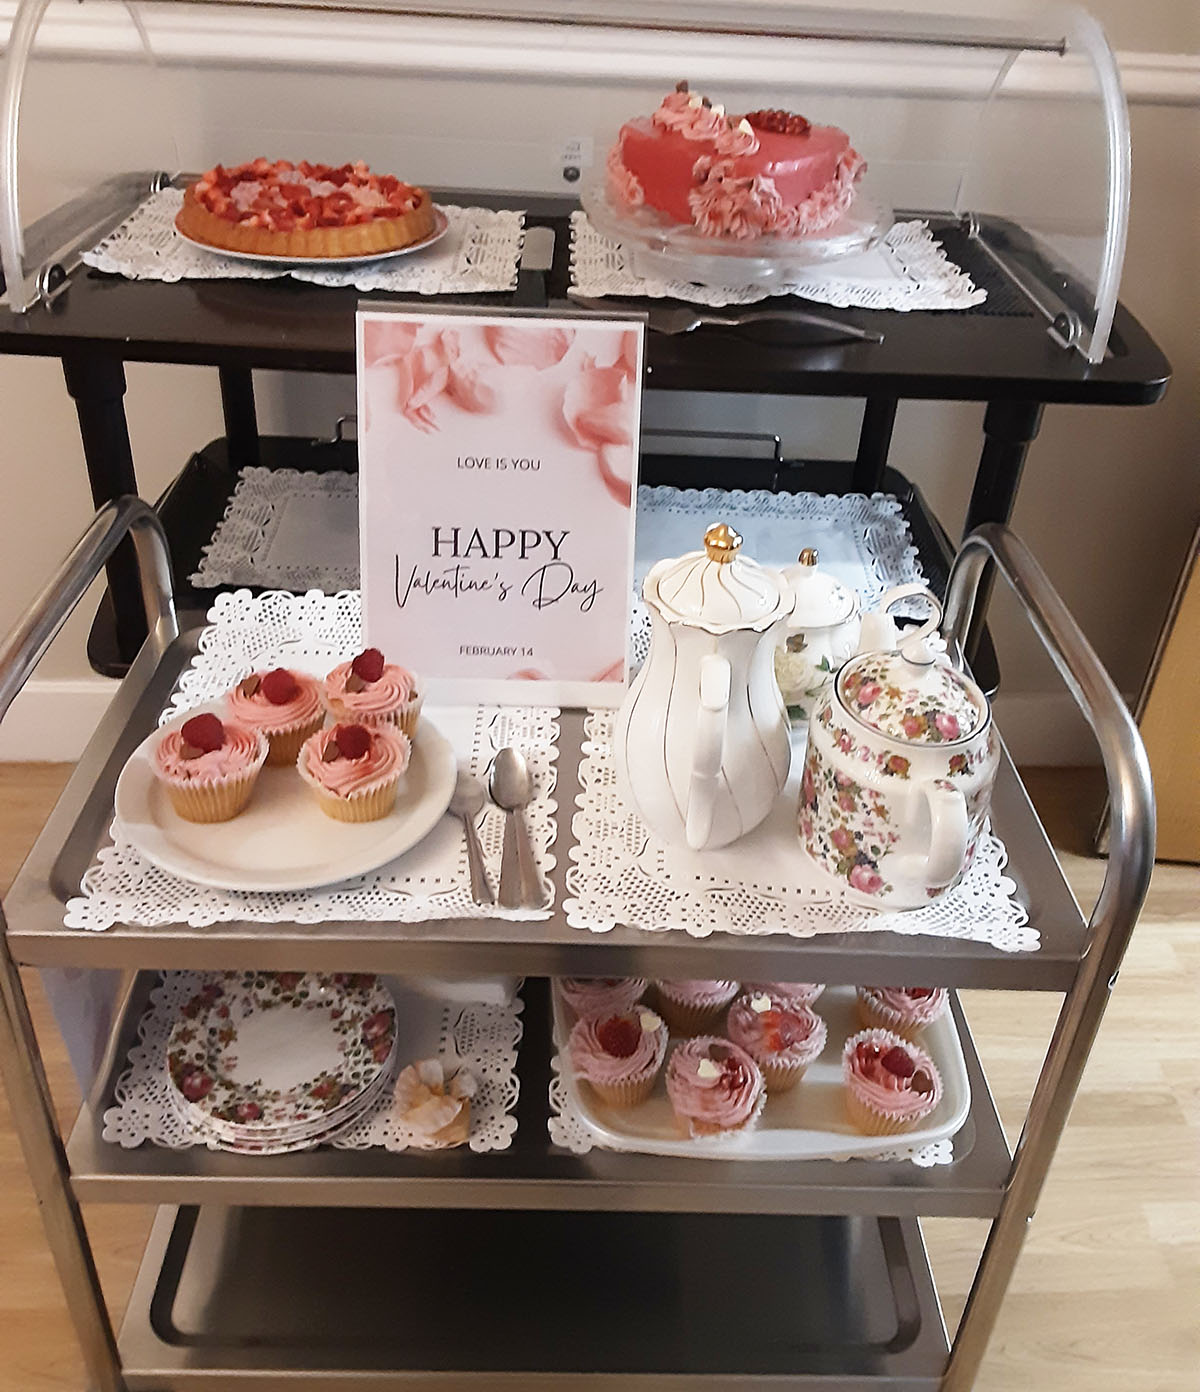 Valentine's Day trolley at Lukestone Care Home